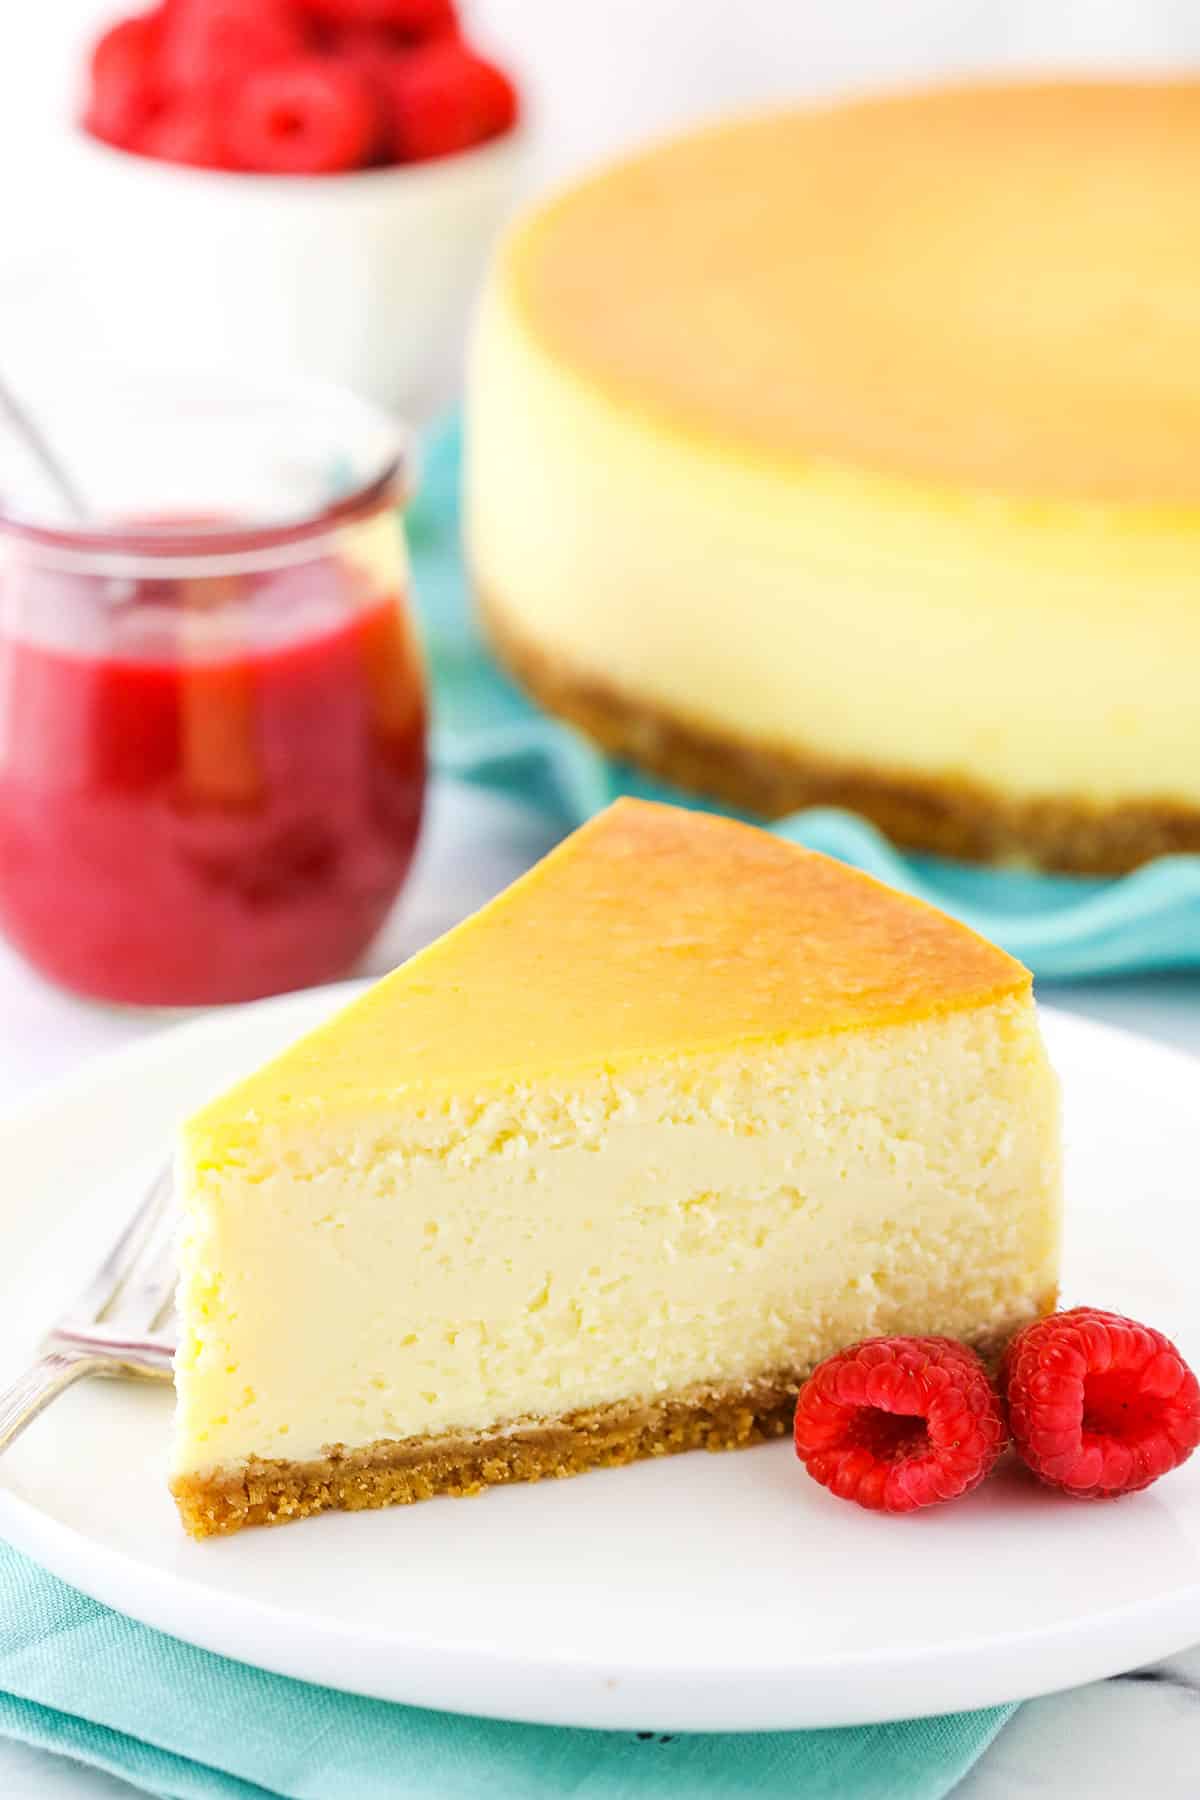 Slice of New York Style Cheesecake on a white plate with a fork and raspberries.